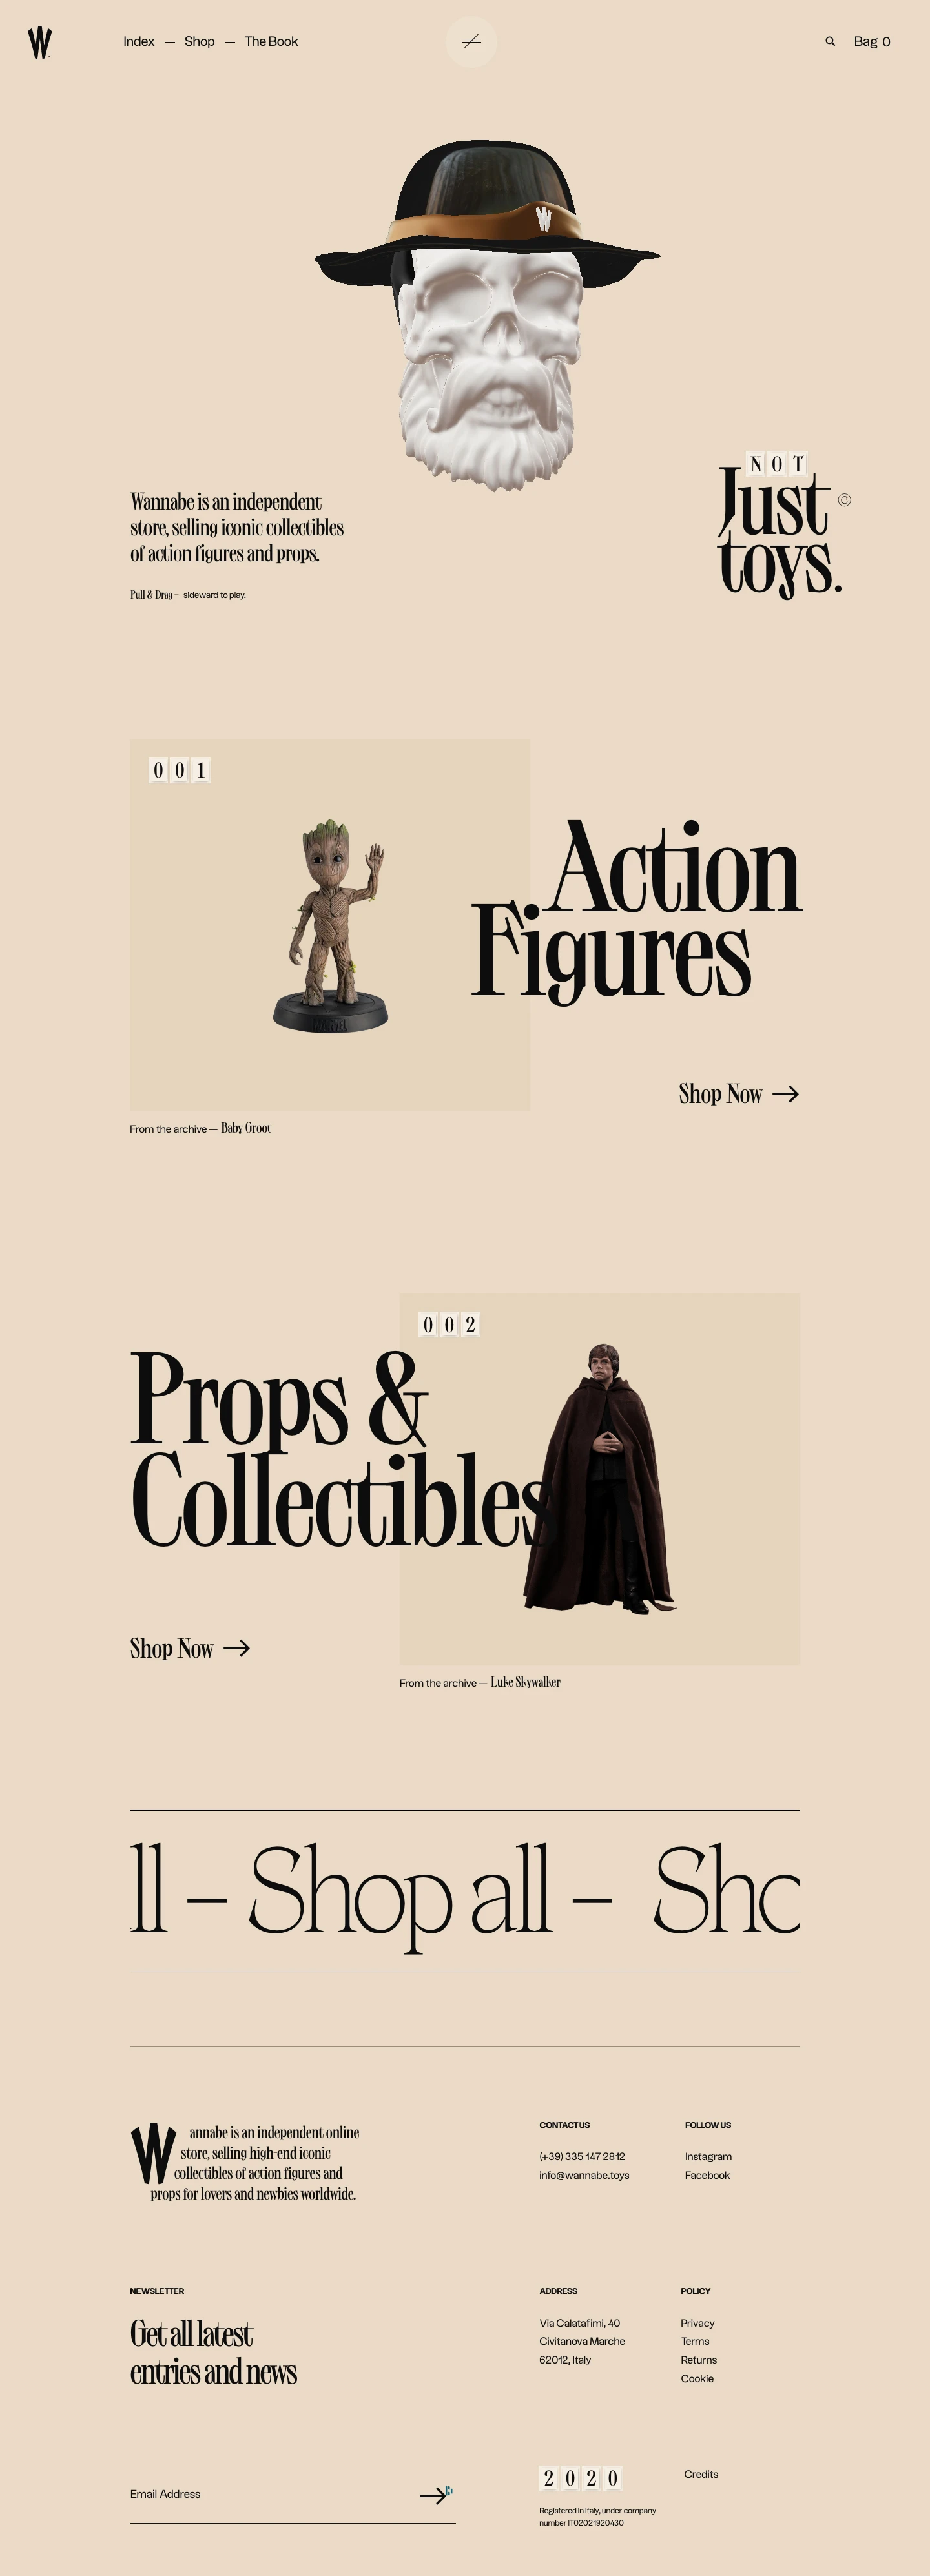 Wannabe Landing Page Example: Wannabe is an independent online store, selling high-end iconic collectibles of action figures and props for lovers and newbies worldwide.